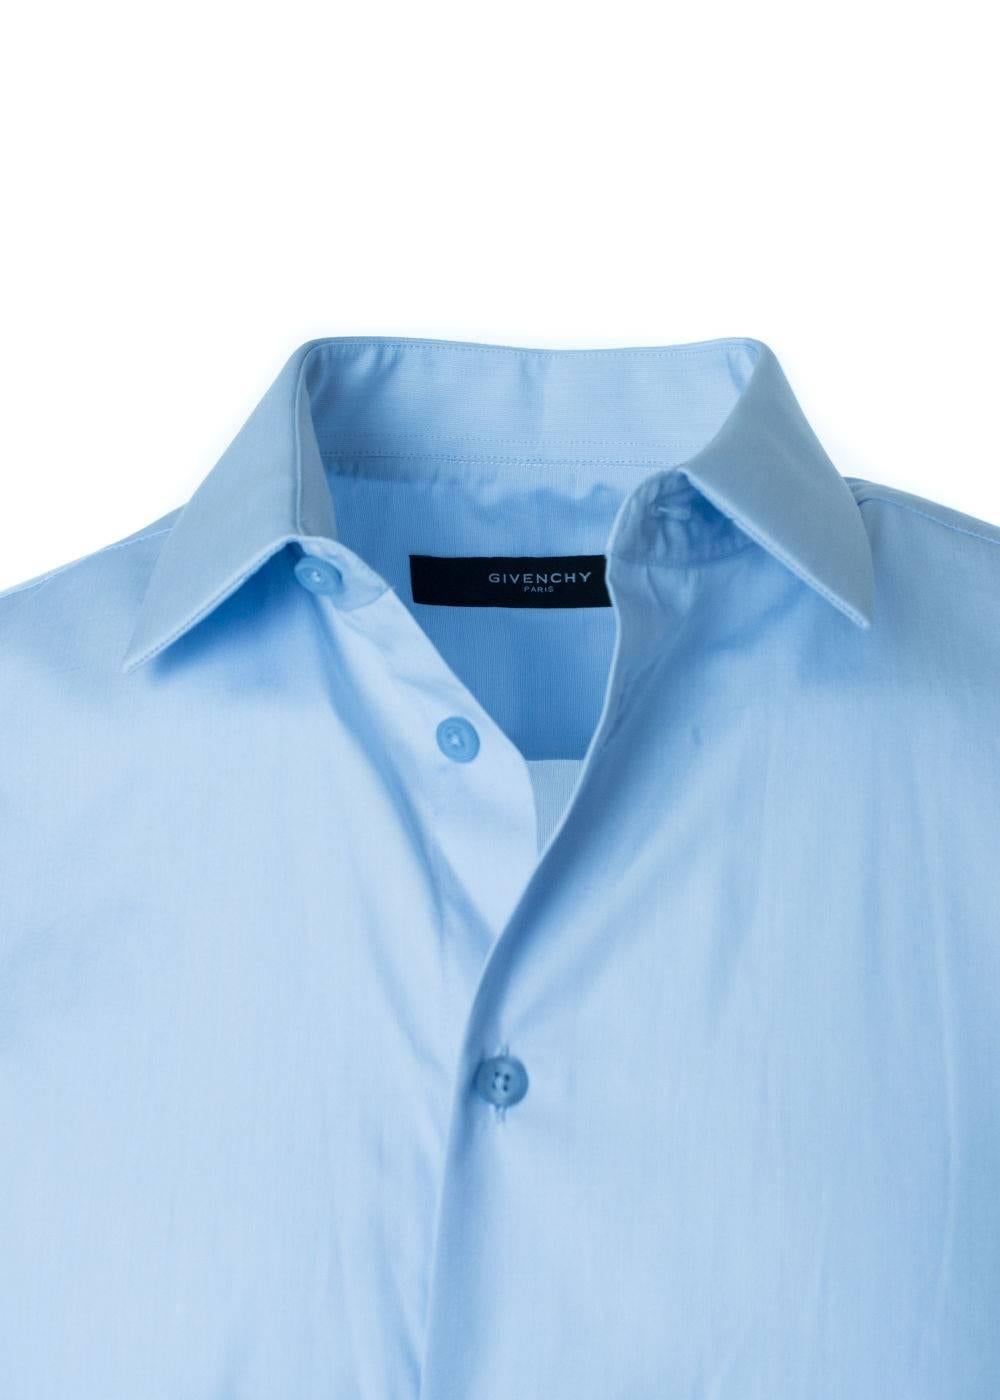 Brand New Givenchy Men's Button Down
Original Tags
Retails in Stores & Online for $495
Men's Size E40 (XXS) Fits True to Size

Classic blue denim button down from fashion house Givenchy with a twist in style. Pair it with your go to bottoms or